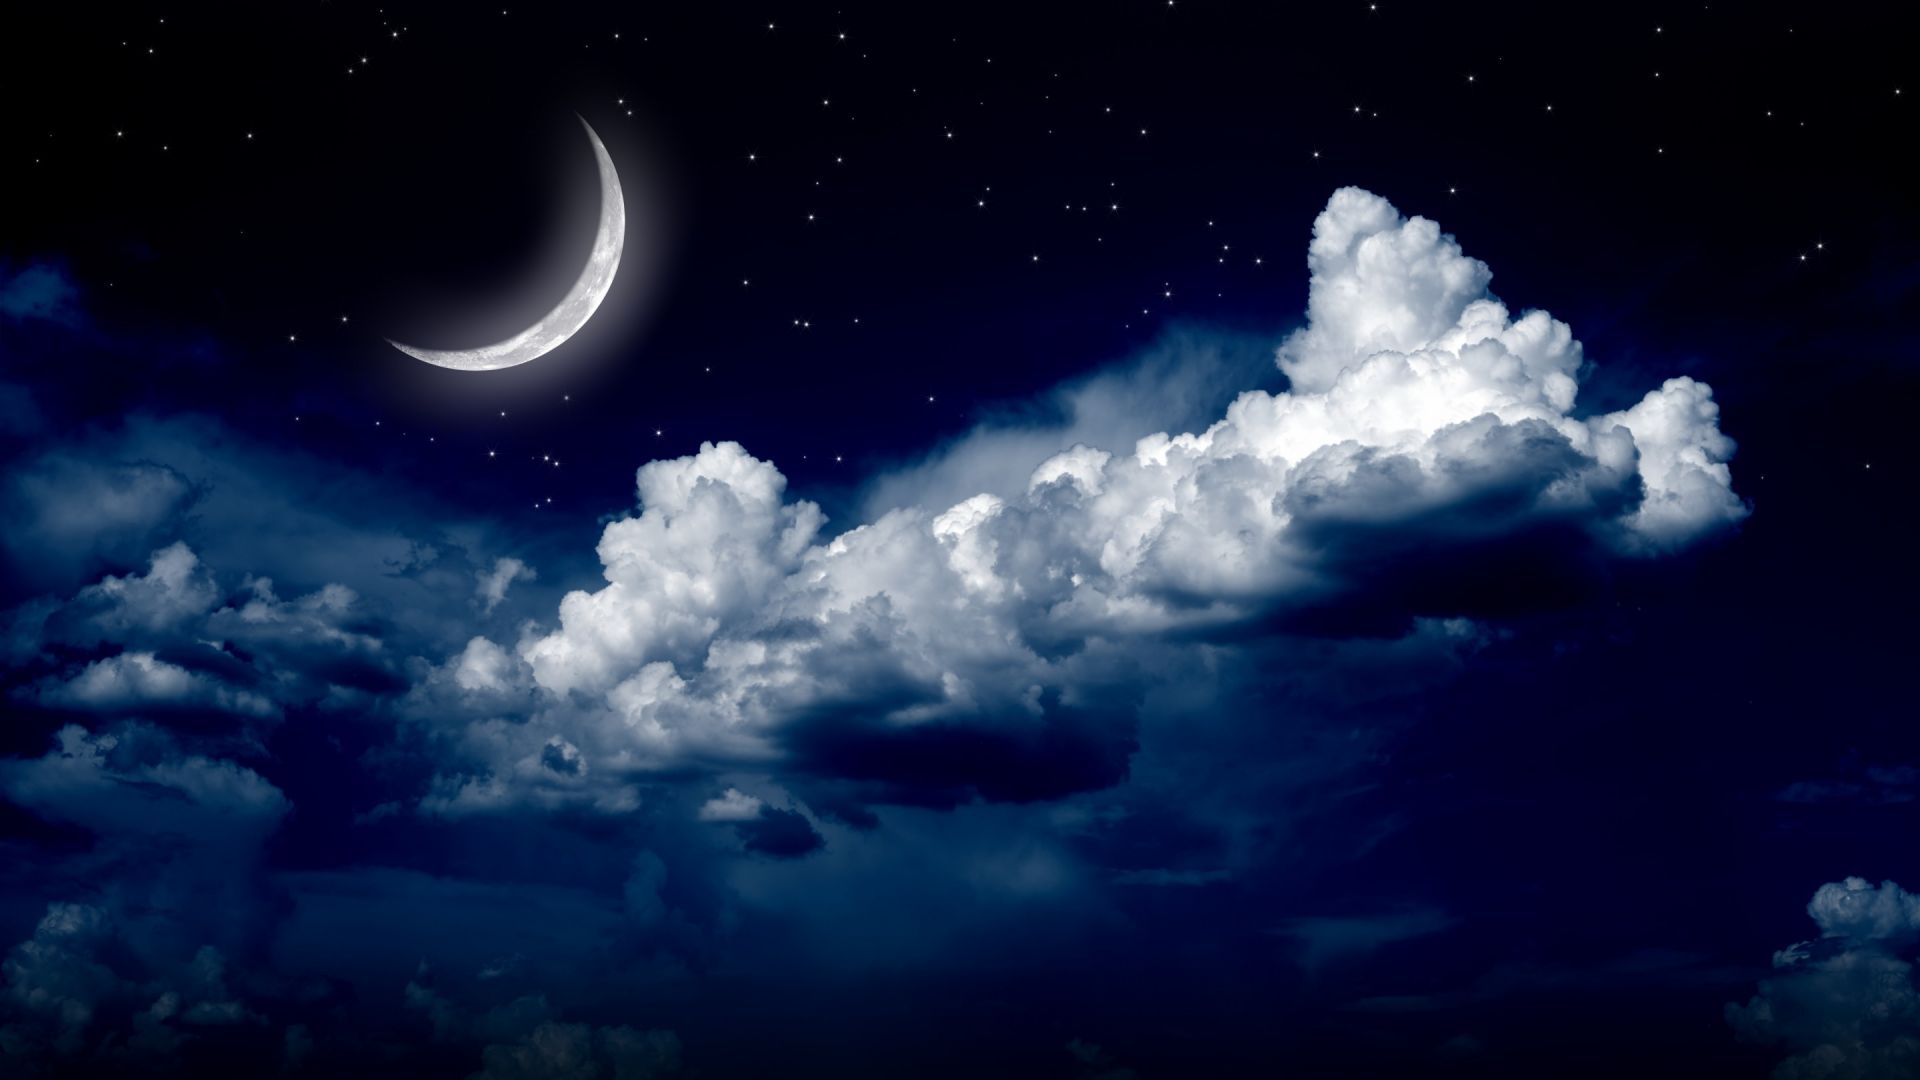 Desktop Wallpaper Moon, Stars And Clouds In Night, Hd Image, Picture,  Background, Ii6g3q